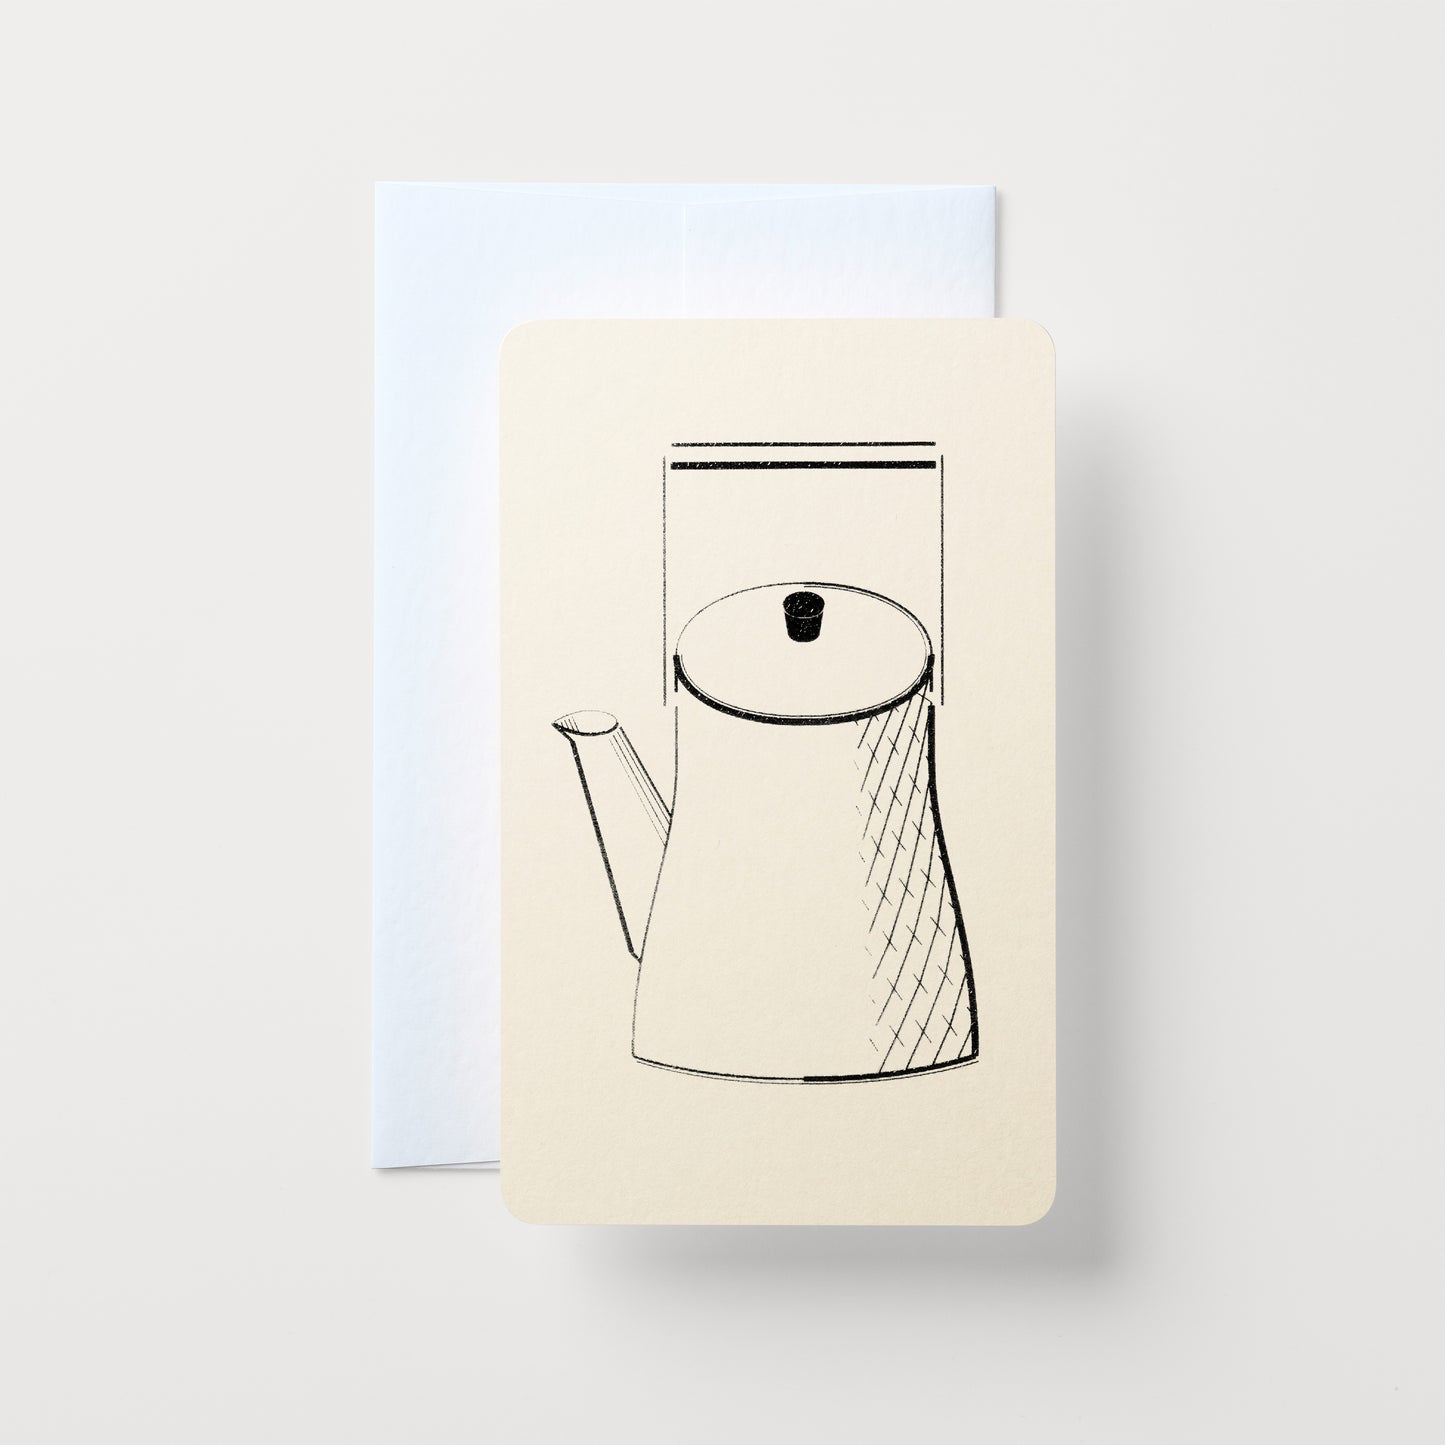 Home Series: Kettle